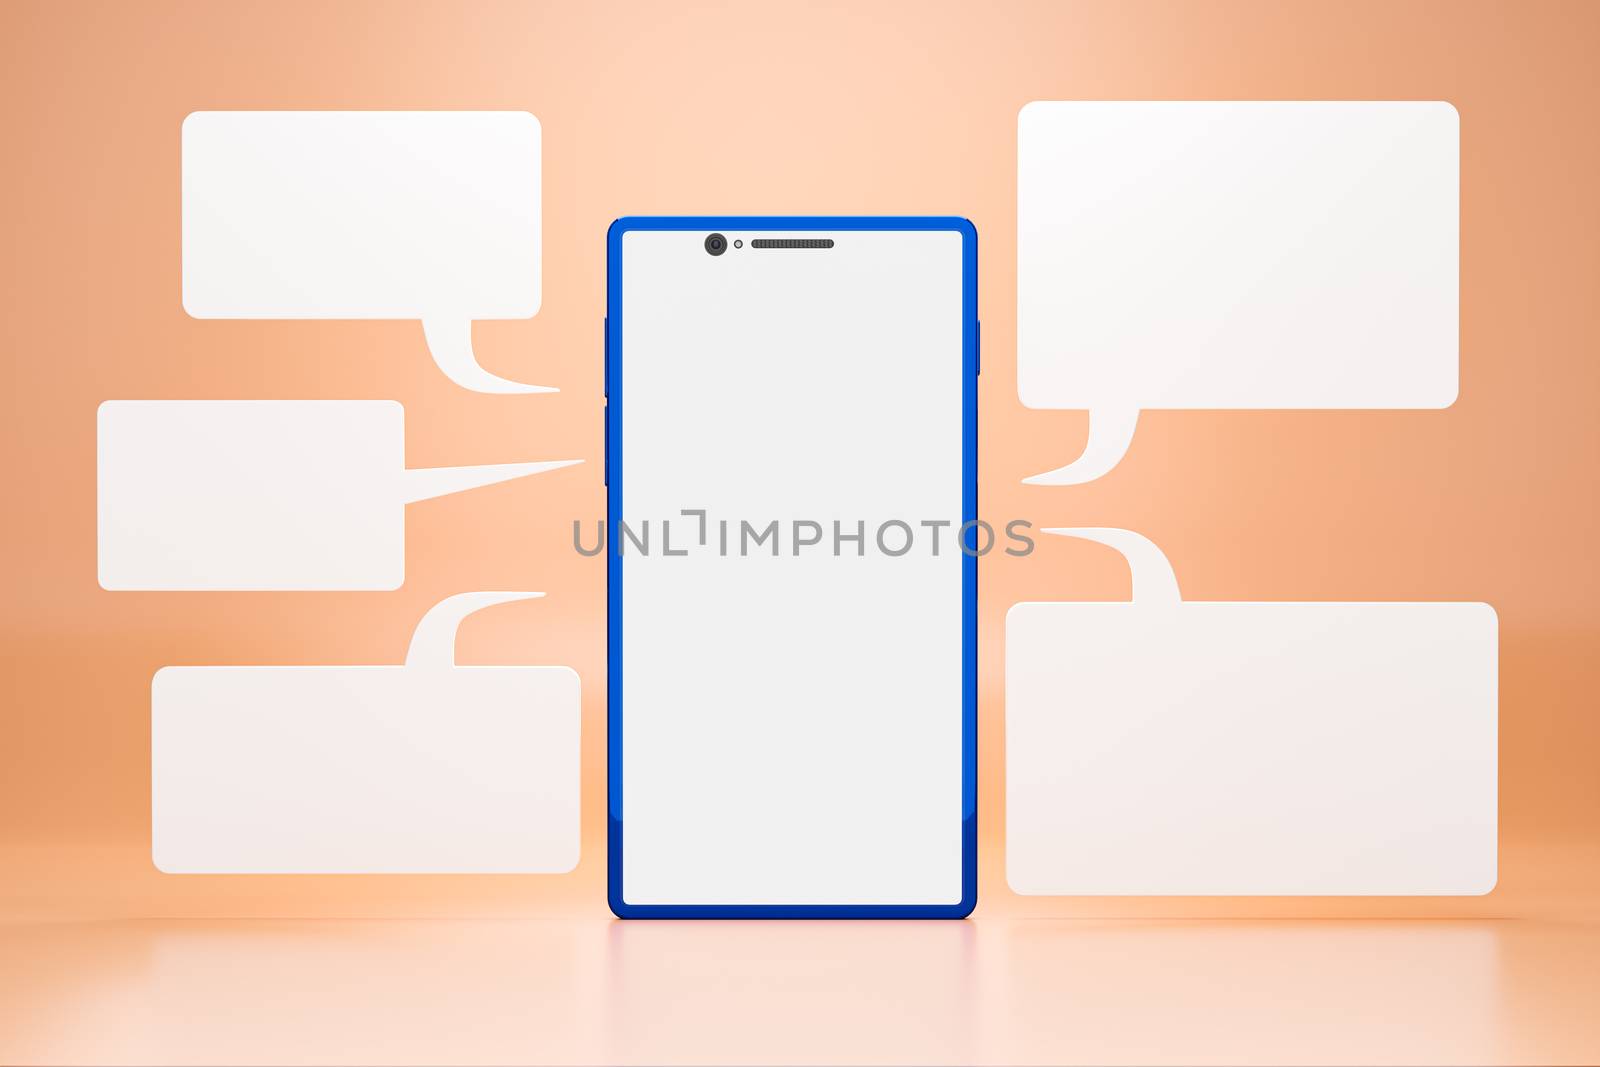 Cell phone with blank LCD screen and chatbox around a smartphone on orange background. Concepts of communication using modern technology through the use of online social forms. Realistic 3D rendering.